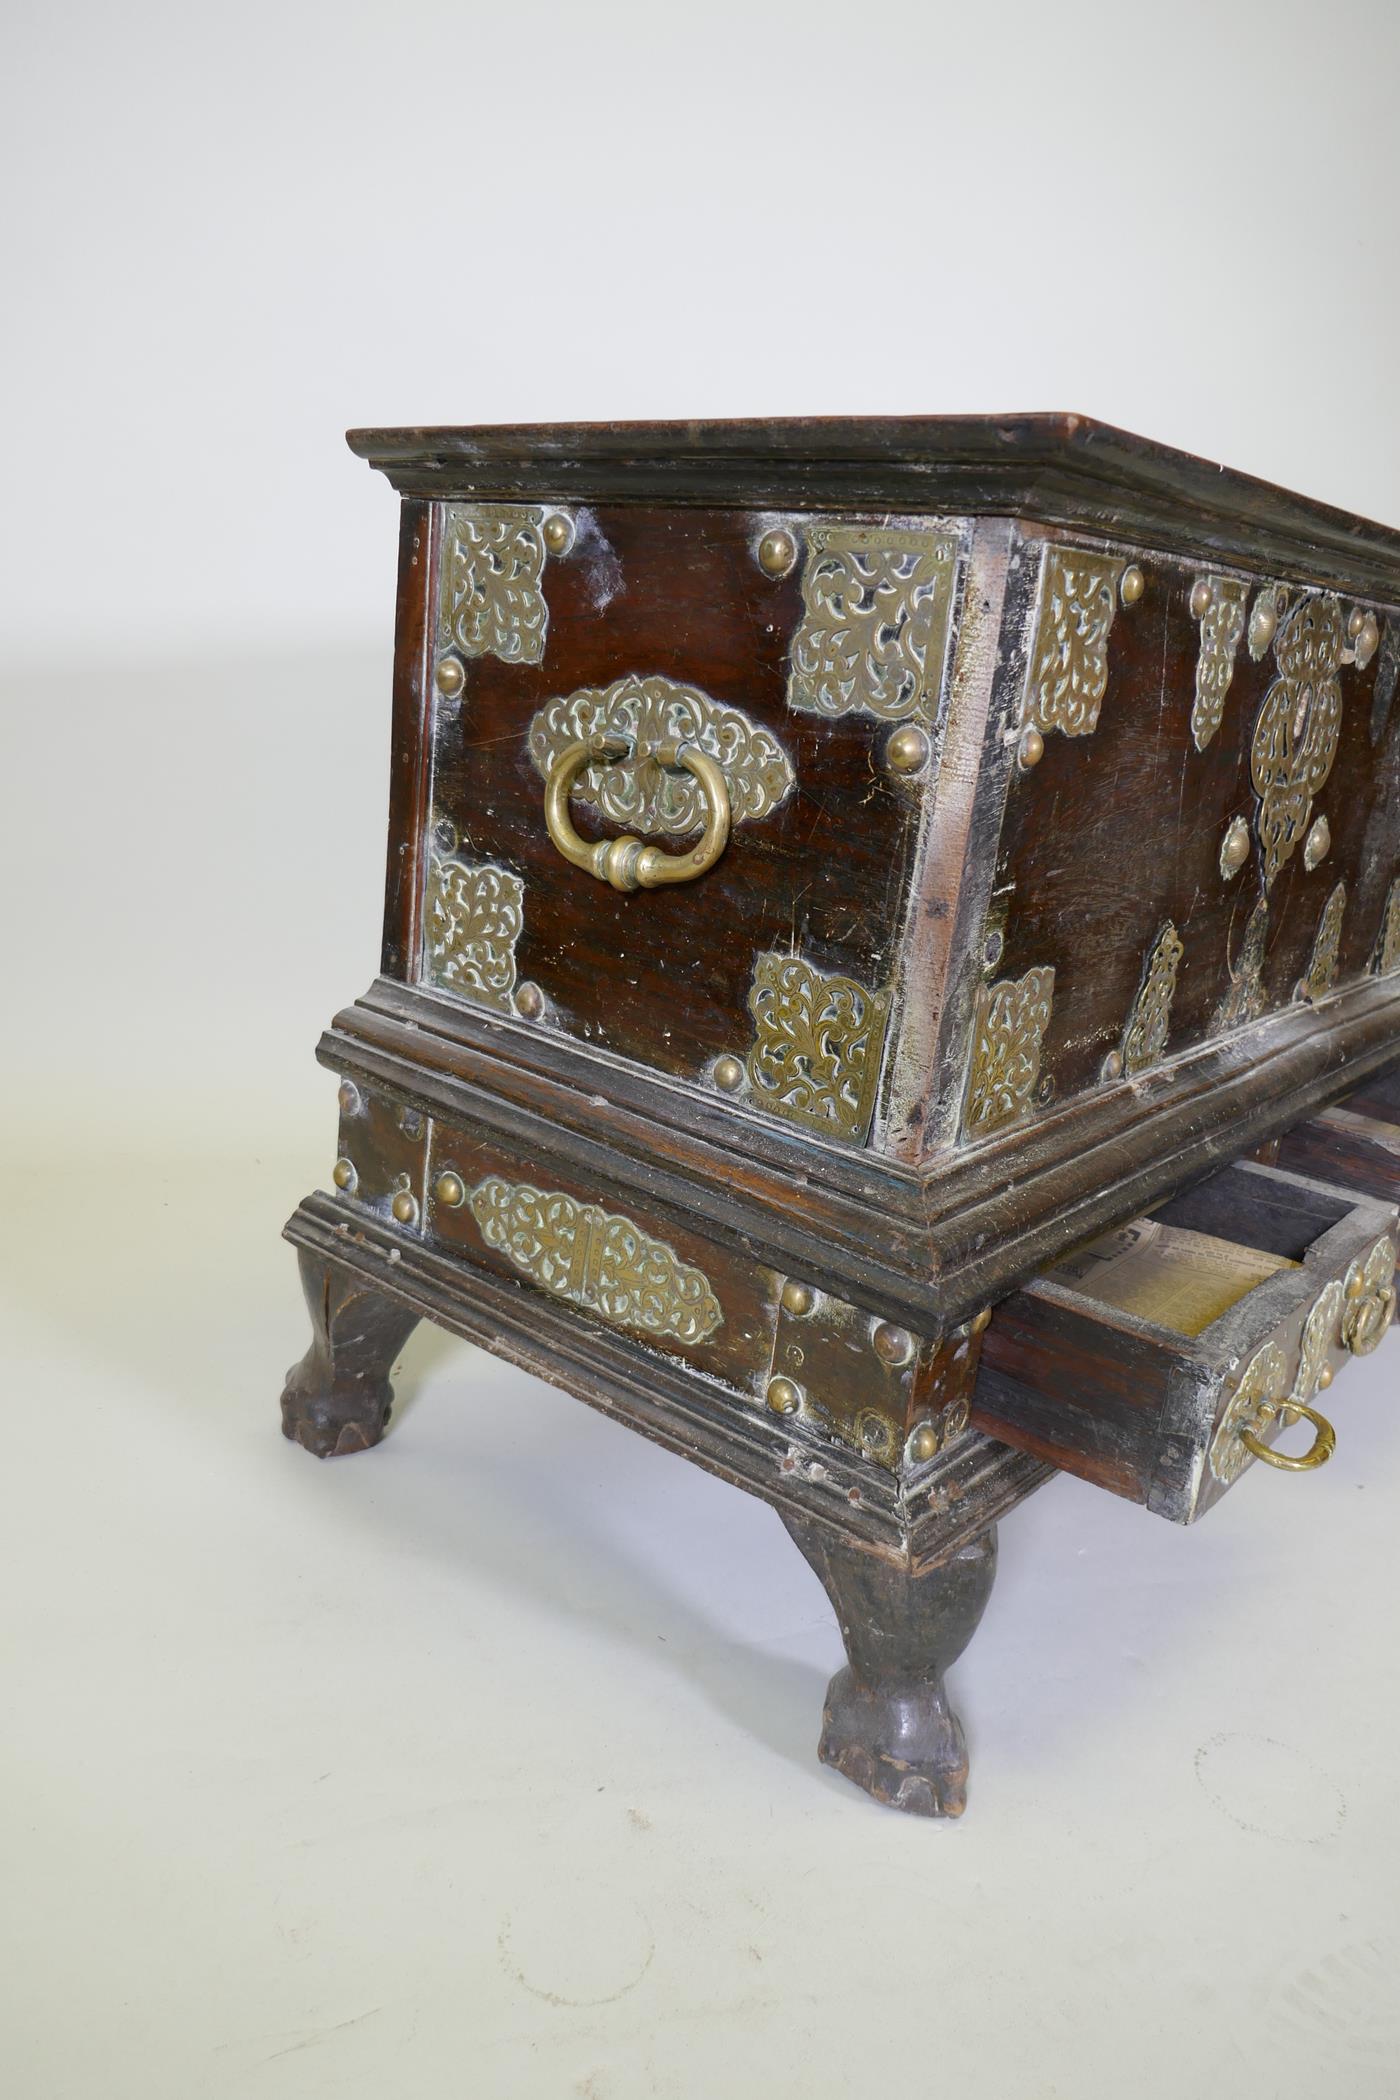 An C18th Dutch colonial teak chest with brass mounts, lift up top and two drawers, raised on claw - Image 6 of 8